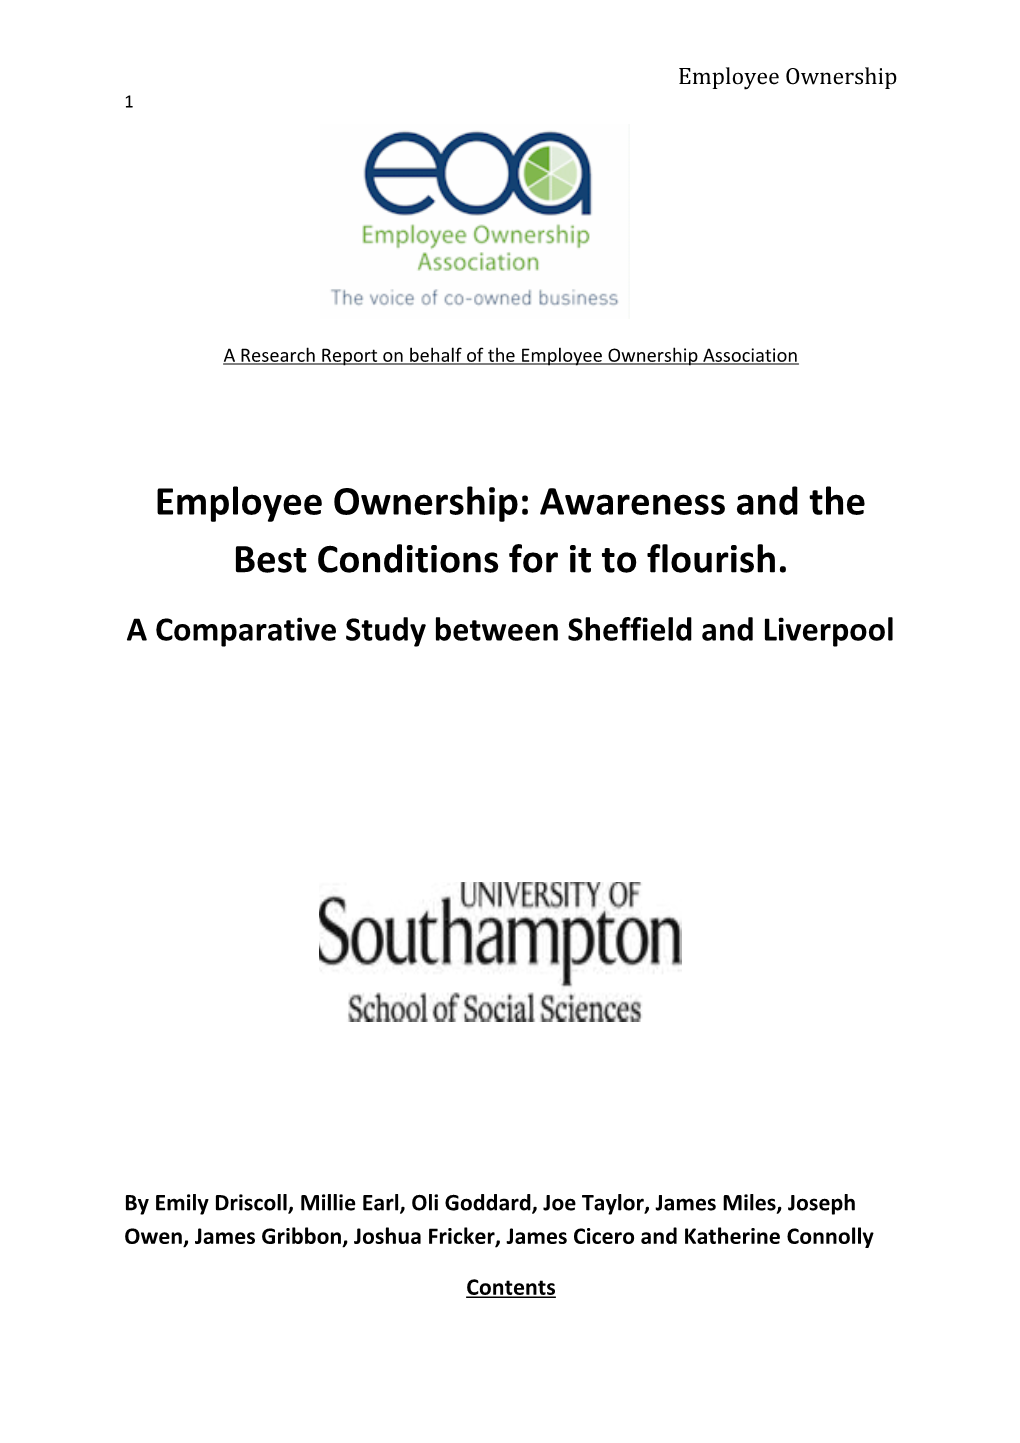 Employee Ownership: Awareness and the Best Conditions for It to Flourish